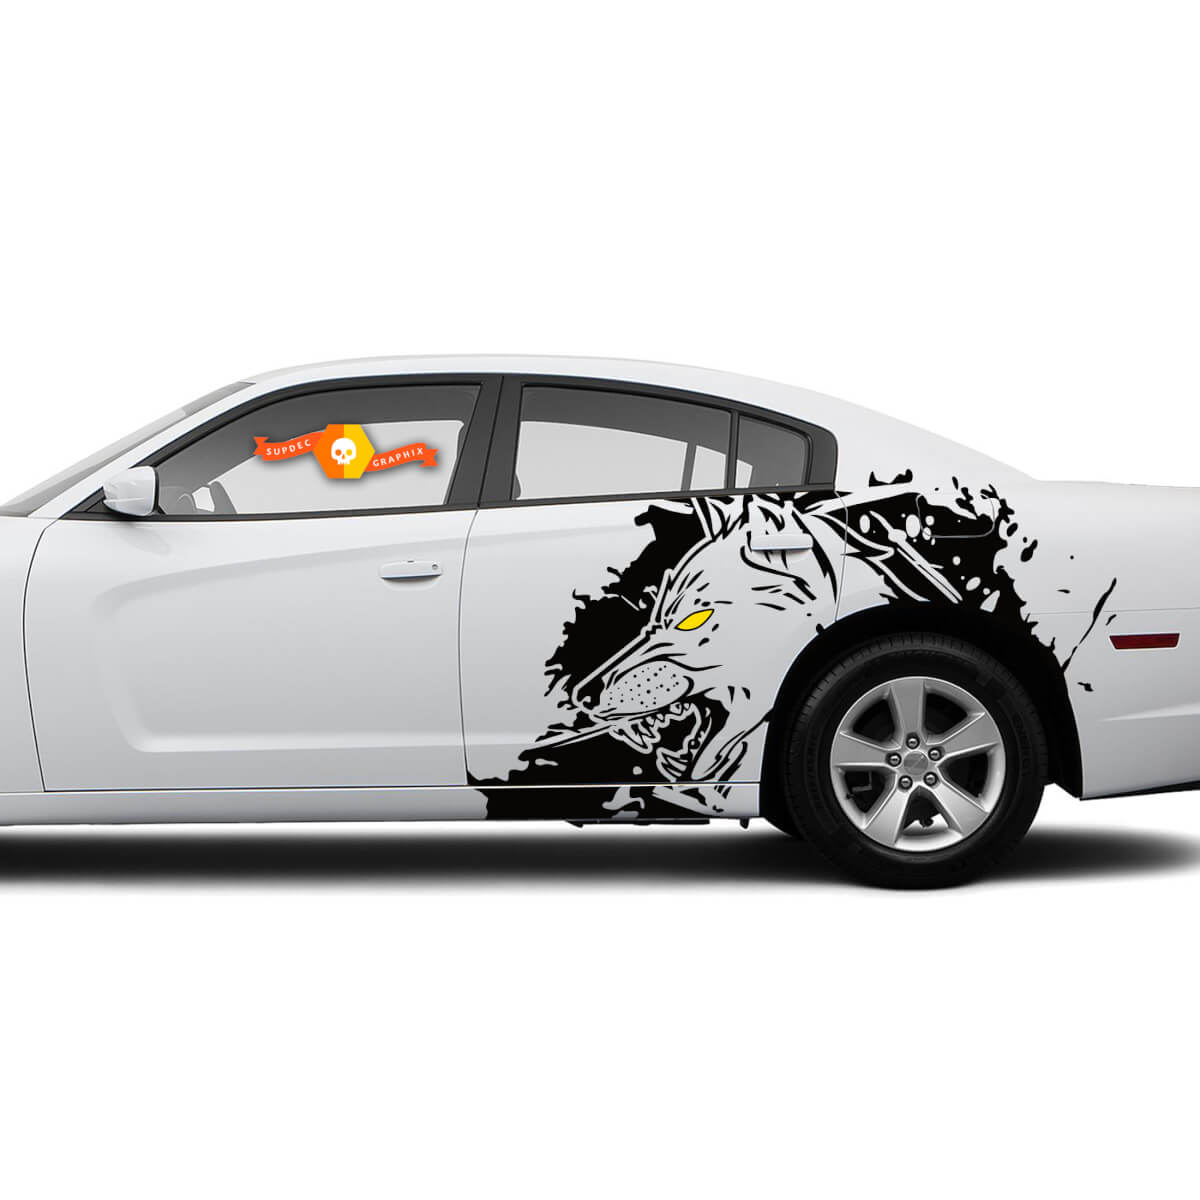 Pair of X-Large WOLF Side Side Dodge Challenger or Charger Splash Wrap Decals Stickers Two Colors